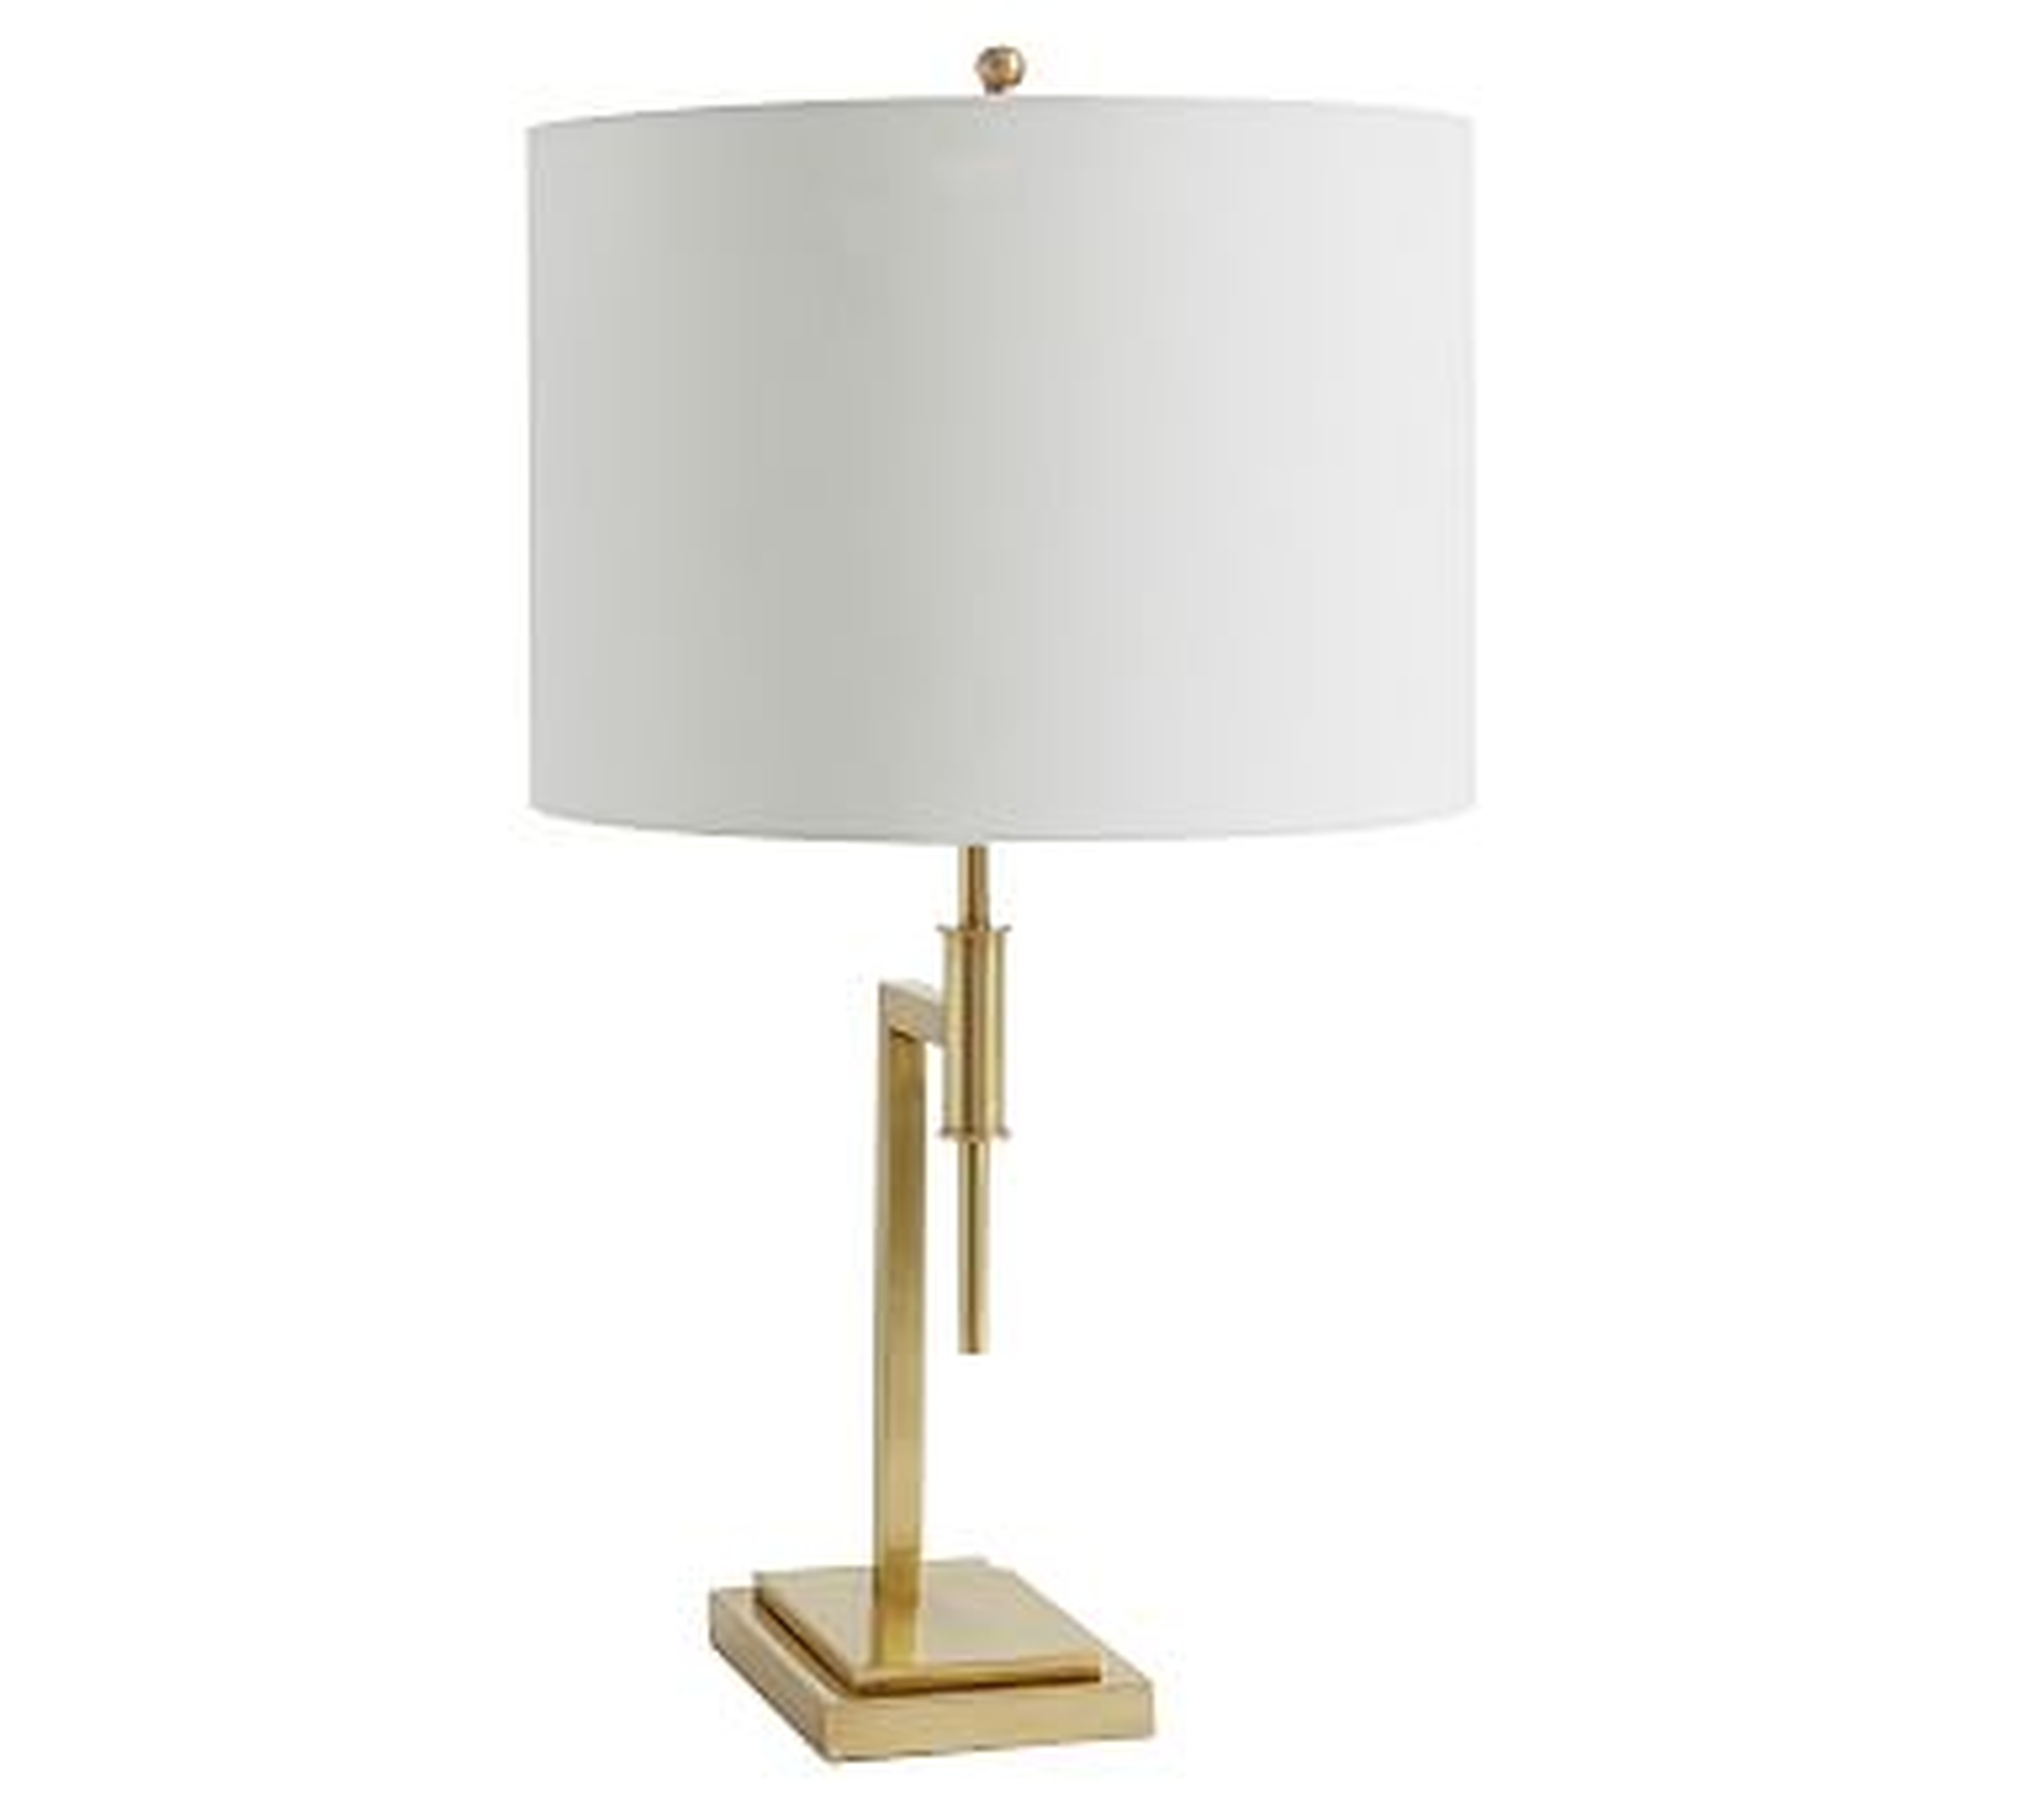 Atticus Classic Table Lamp, Antique Brass - Pottery Barn